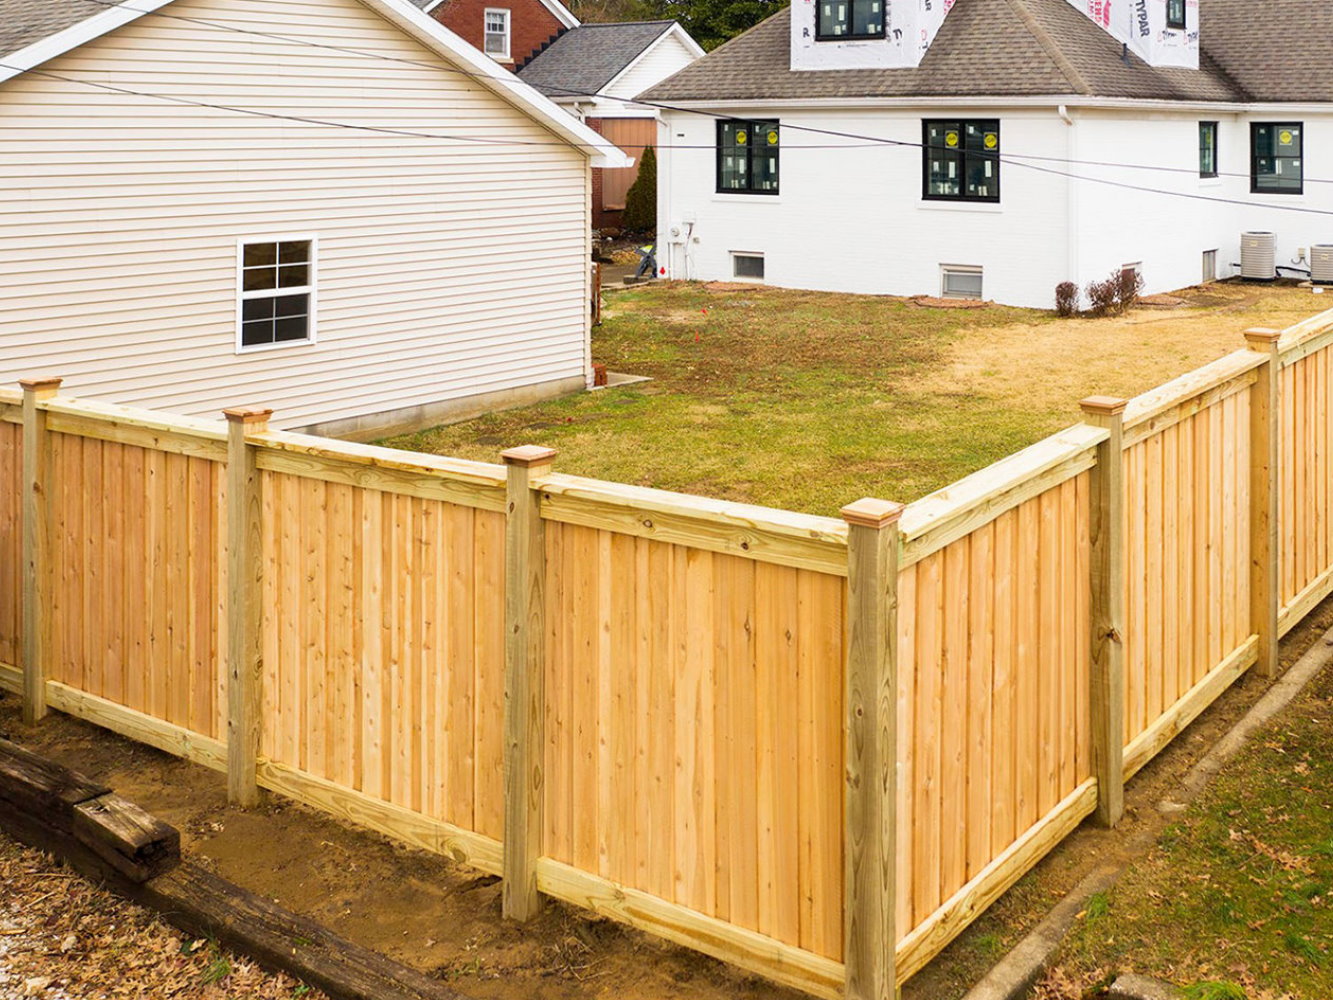 Rockport IN cap and trim style wood fence